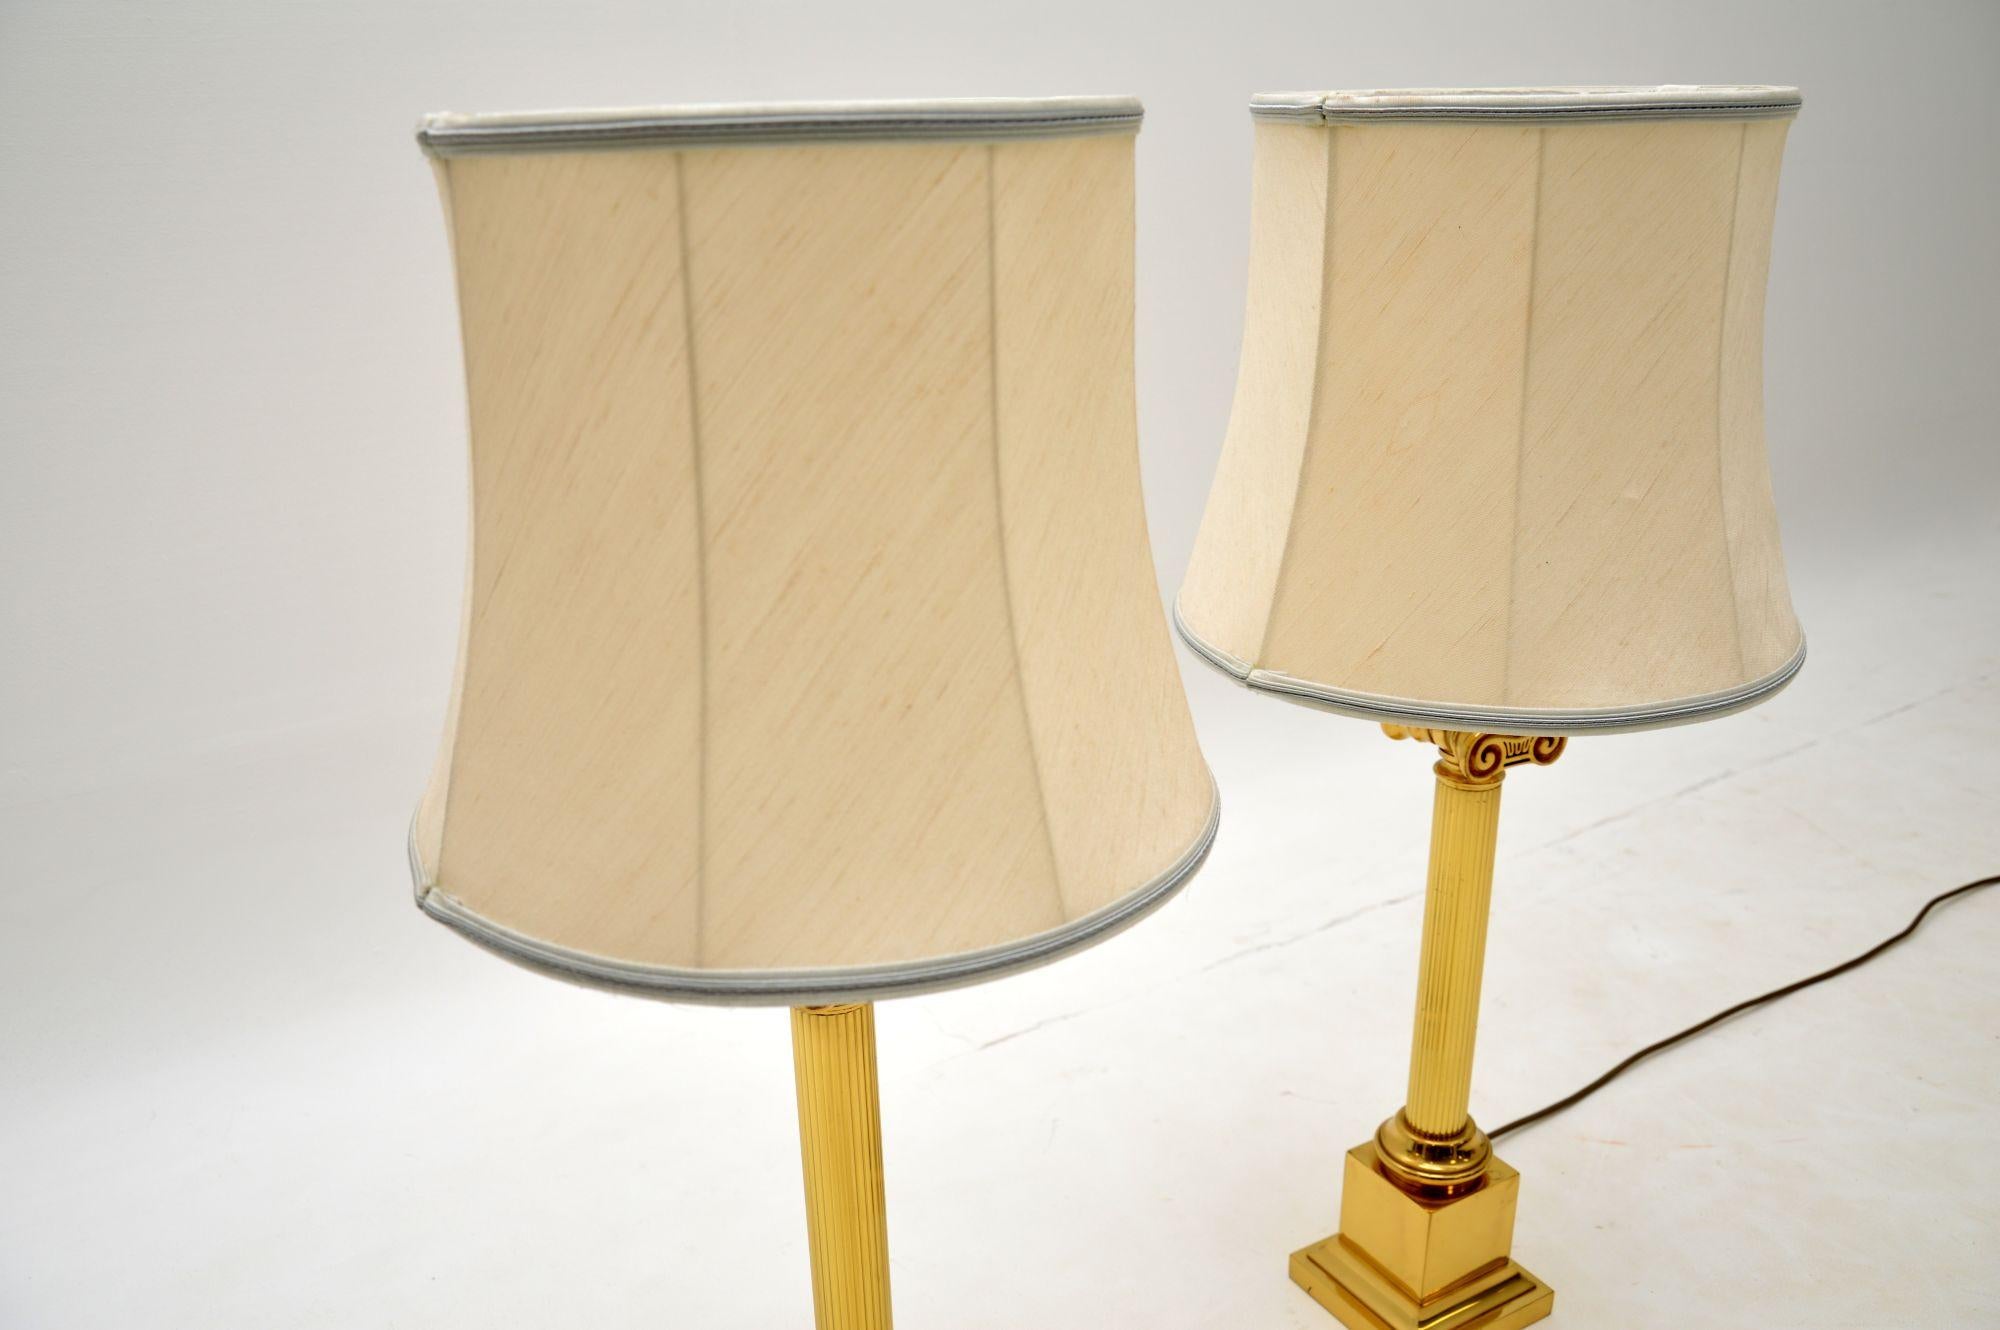 English Pair of Large Vintage Brass Table Lamps